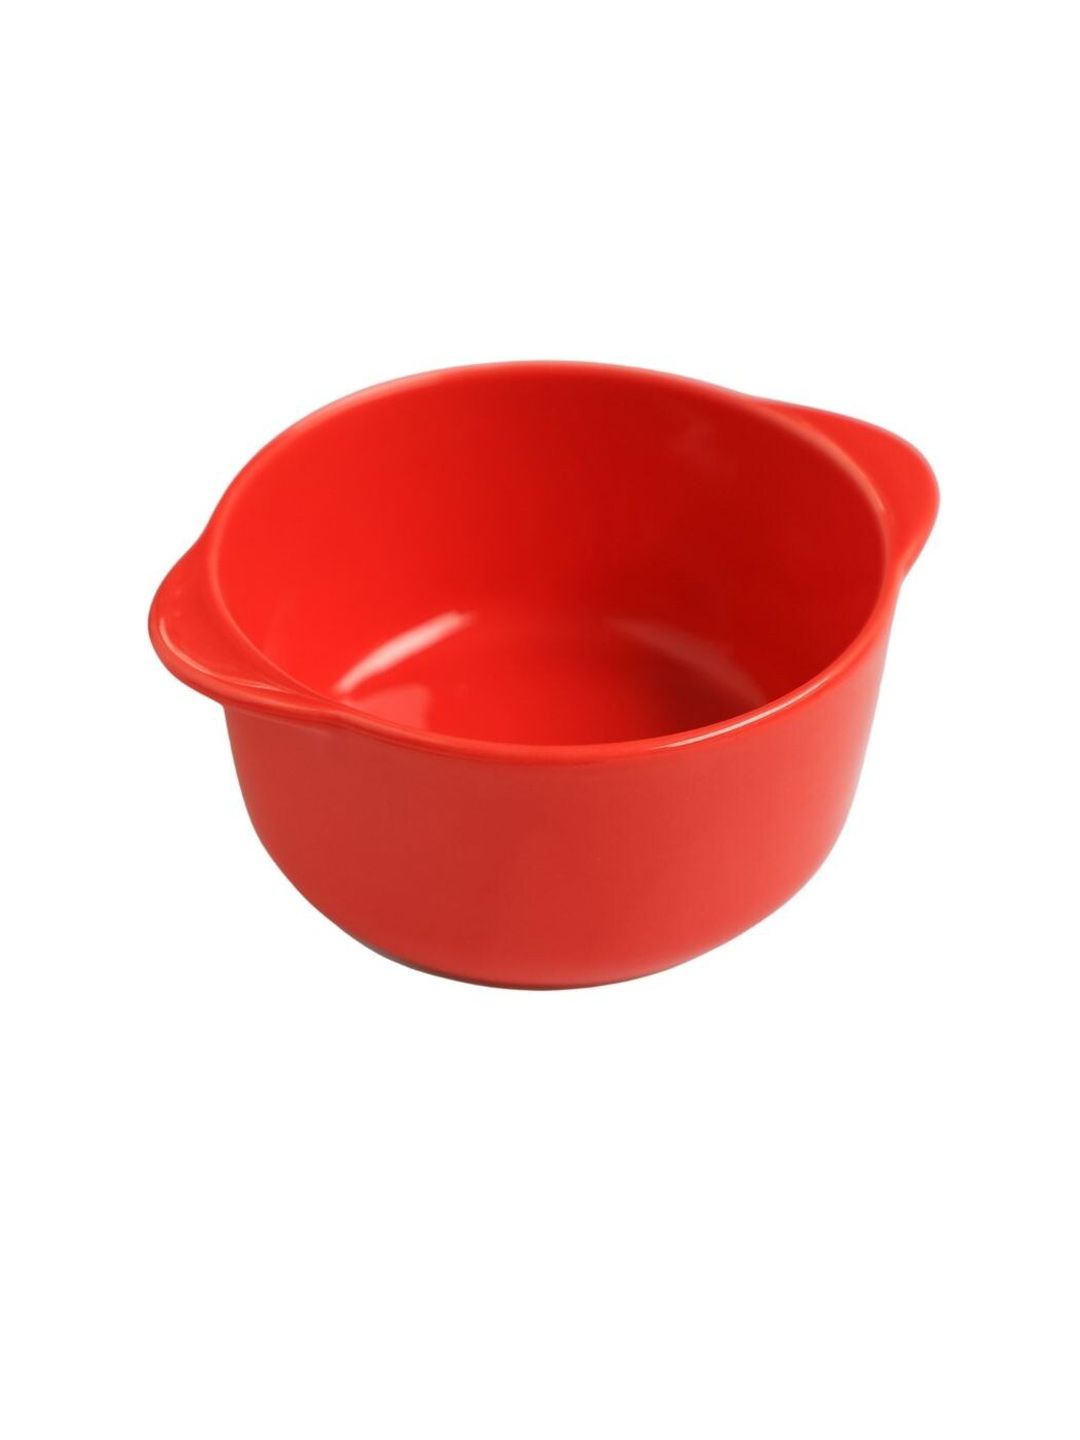 Nestasia Red Solid Small Baking Bowl Price in India